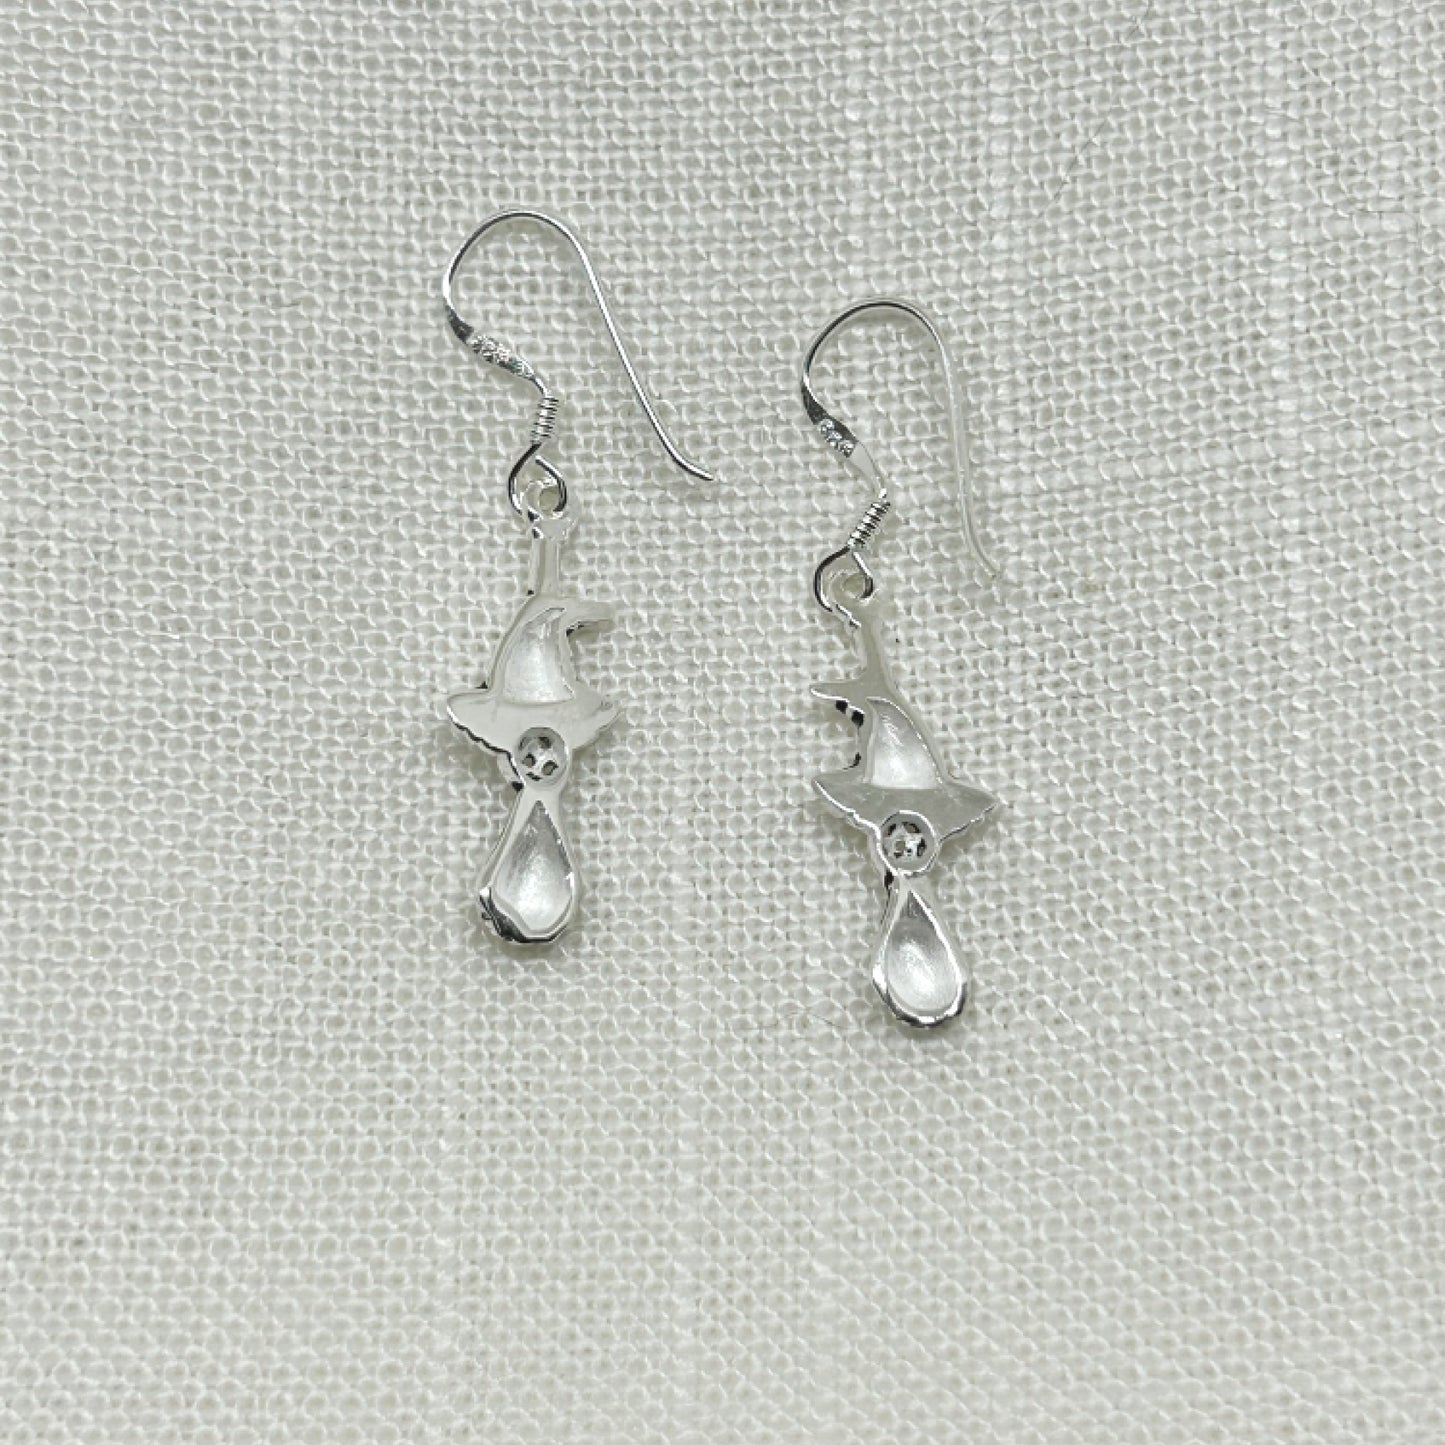 Sterling Silver Witches' Besom Broomstick & Hat Drop Earrings